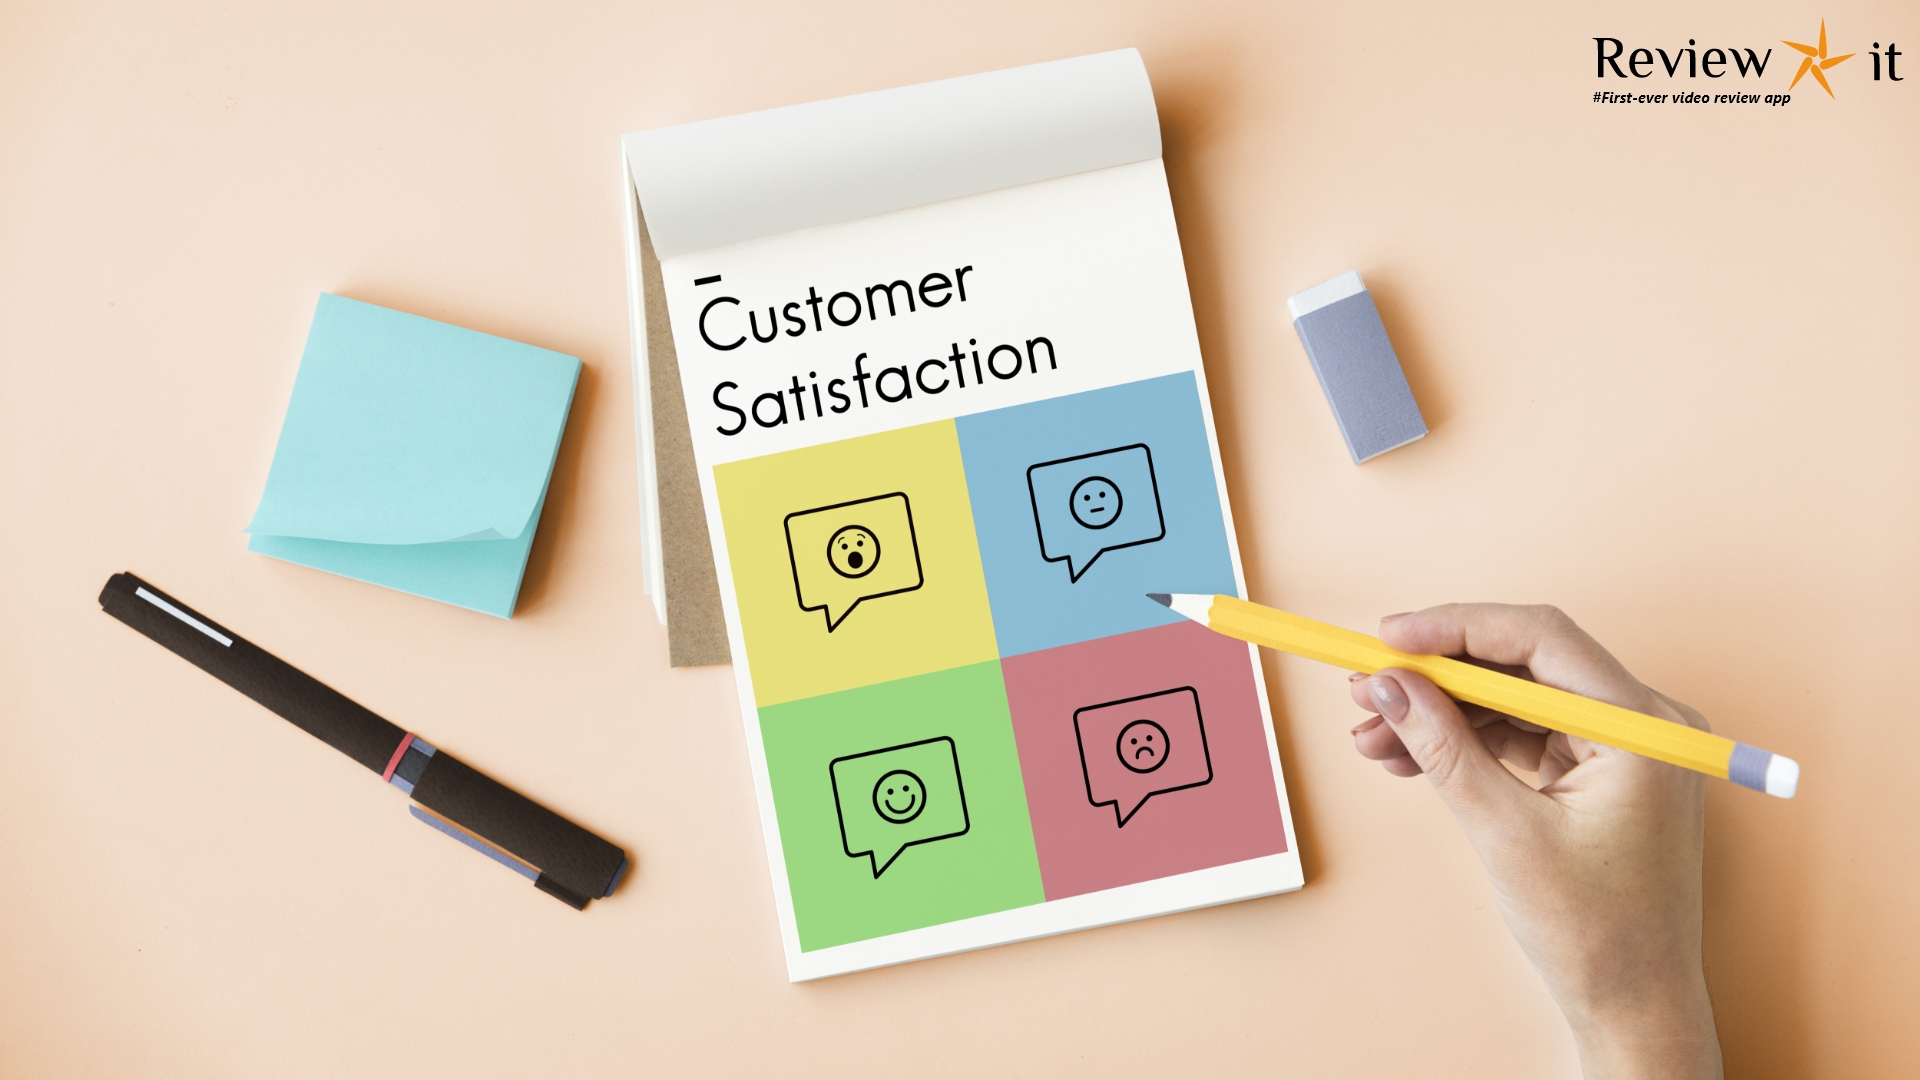 Ways to delight your customers